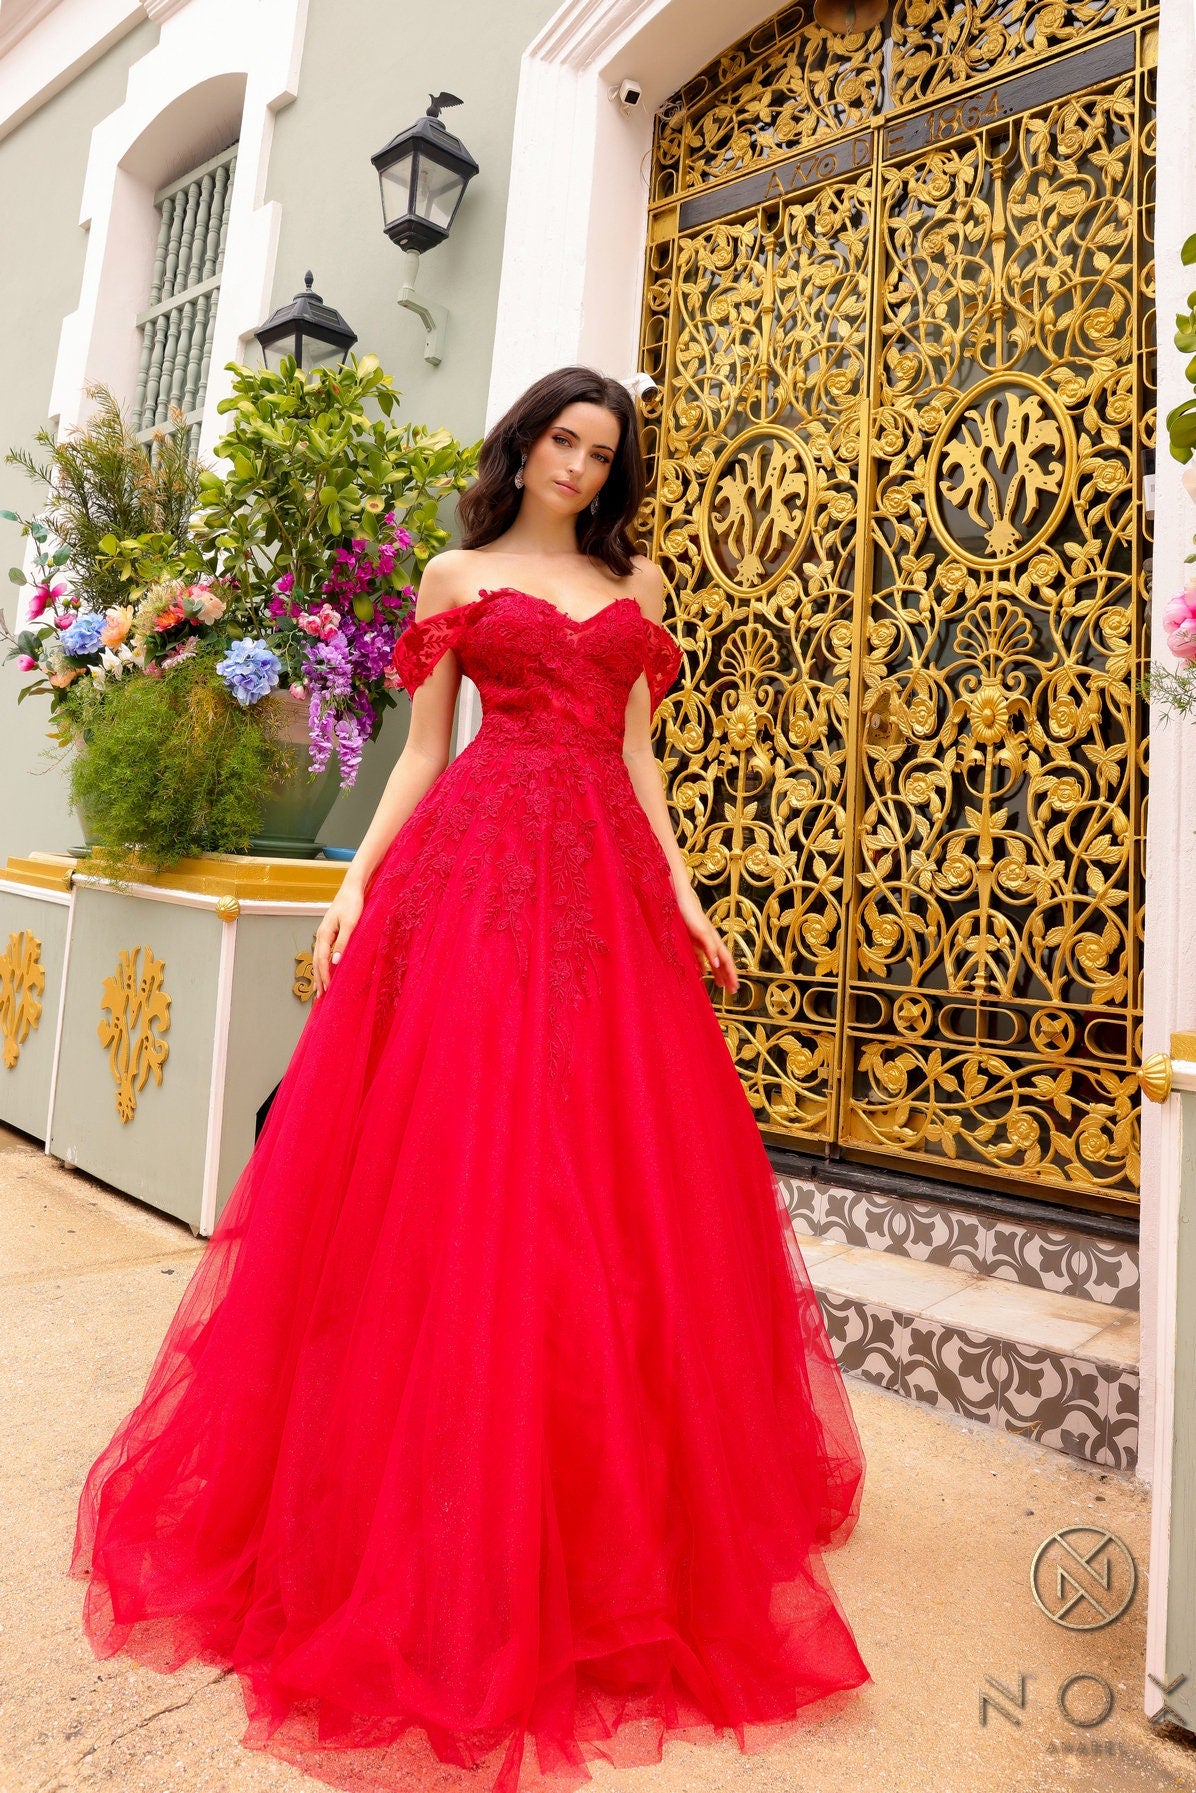 Classic Aline Off the Shoulder Wedding Dress Bridal Gown Sleeveless Sweetheart Neckline Full Skirt Black Red or Blue Open Back Corset Lace